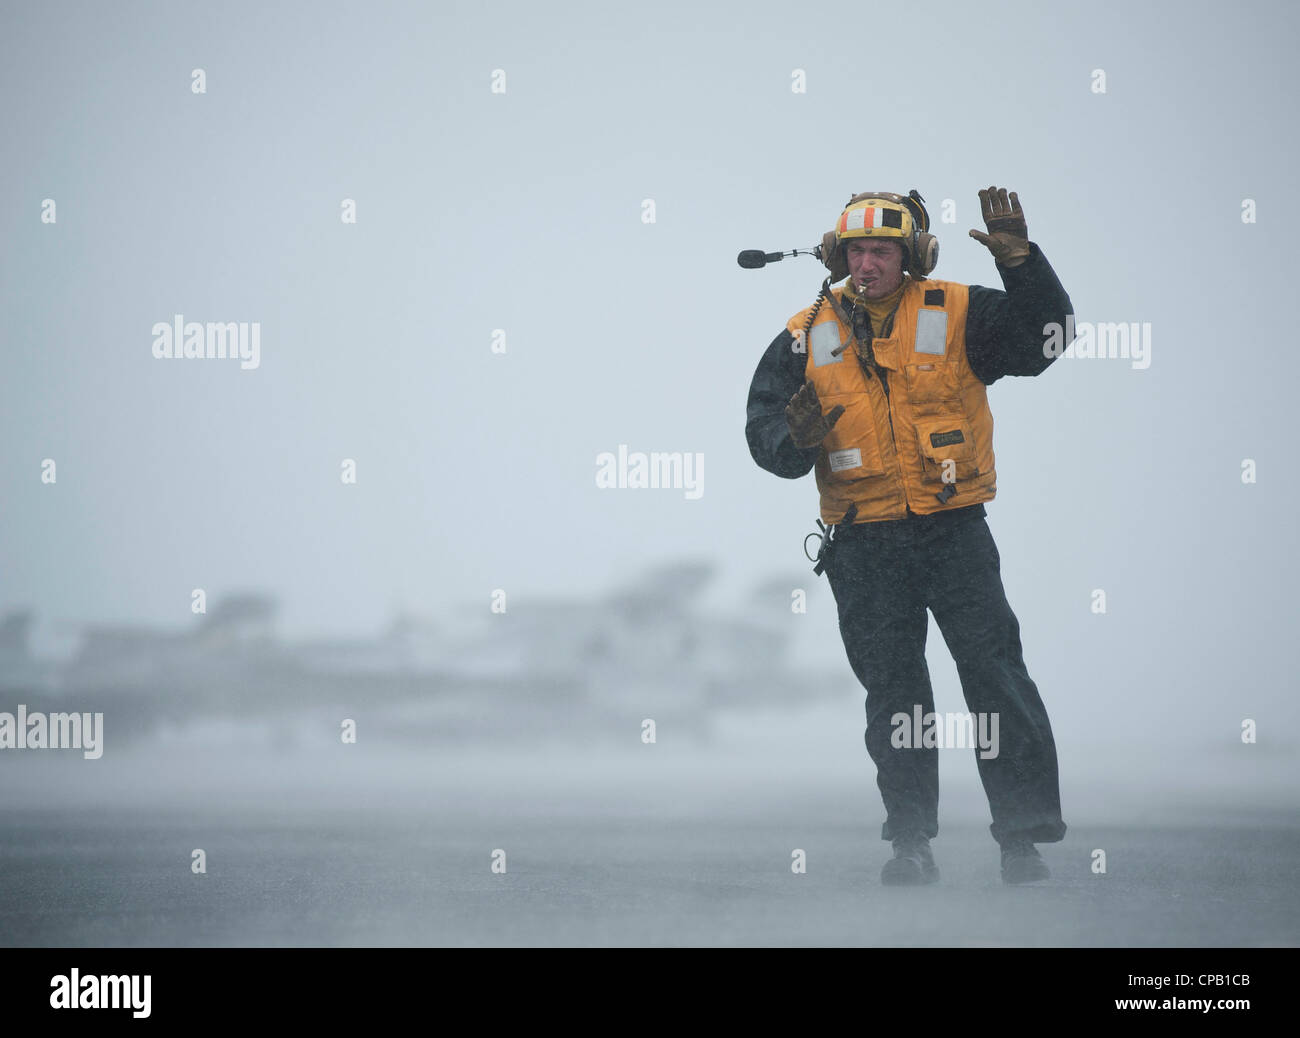 Aviation Boatswain's Mate (Handling) 2nd Class Jathan Lane directs the movement of aircraft during foul weather on the flight deck aboard the Nimitz-class aircraft carrier USS Carl Vinson (CVN 70). Carl Vinson and Carrier Air Wing (CVW) 17 are deployed to the U.S. 7th Fleet area of operations. Stock Photo